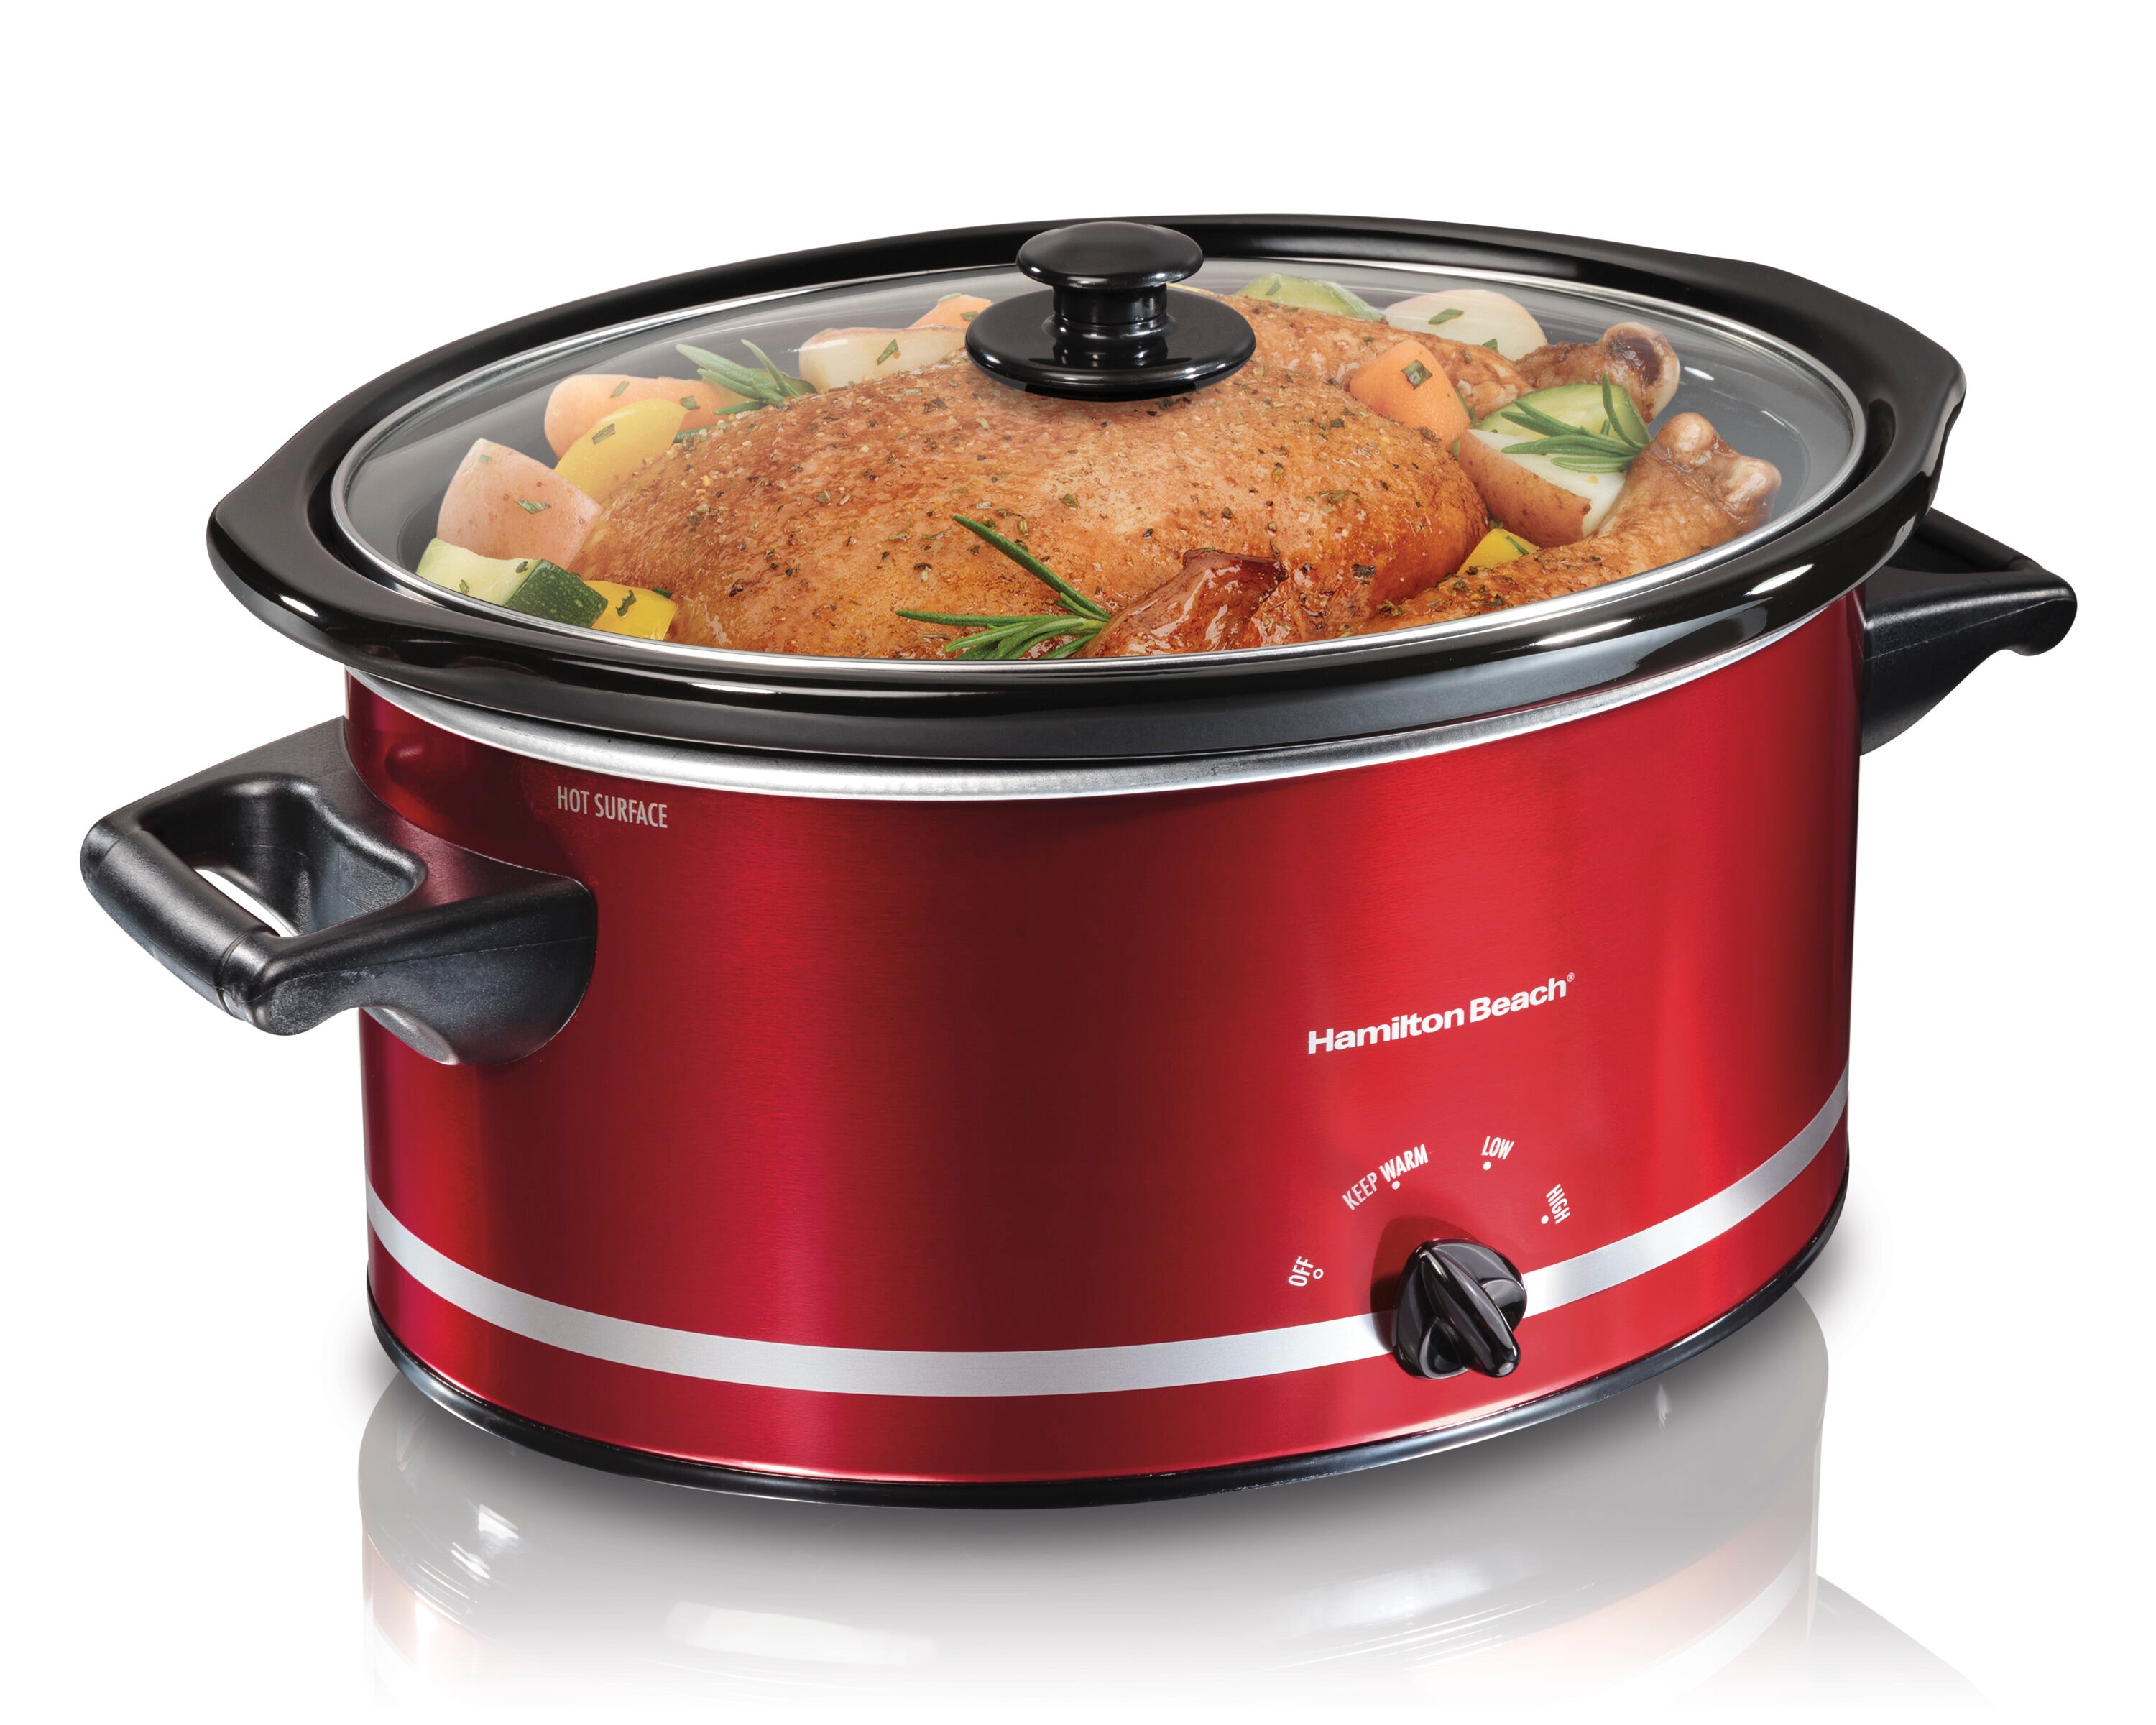 Hamilton Beach 8-Quart Red Oval Slow Cooker with Keep Warm Setting